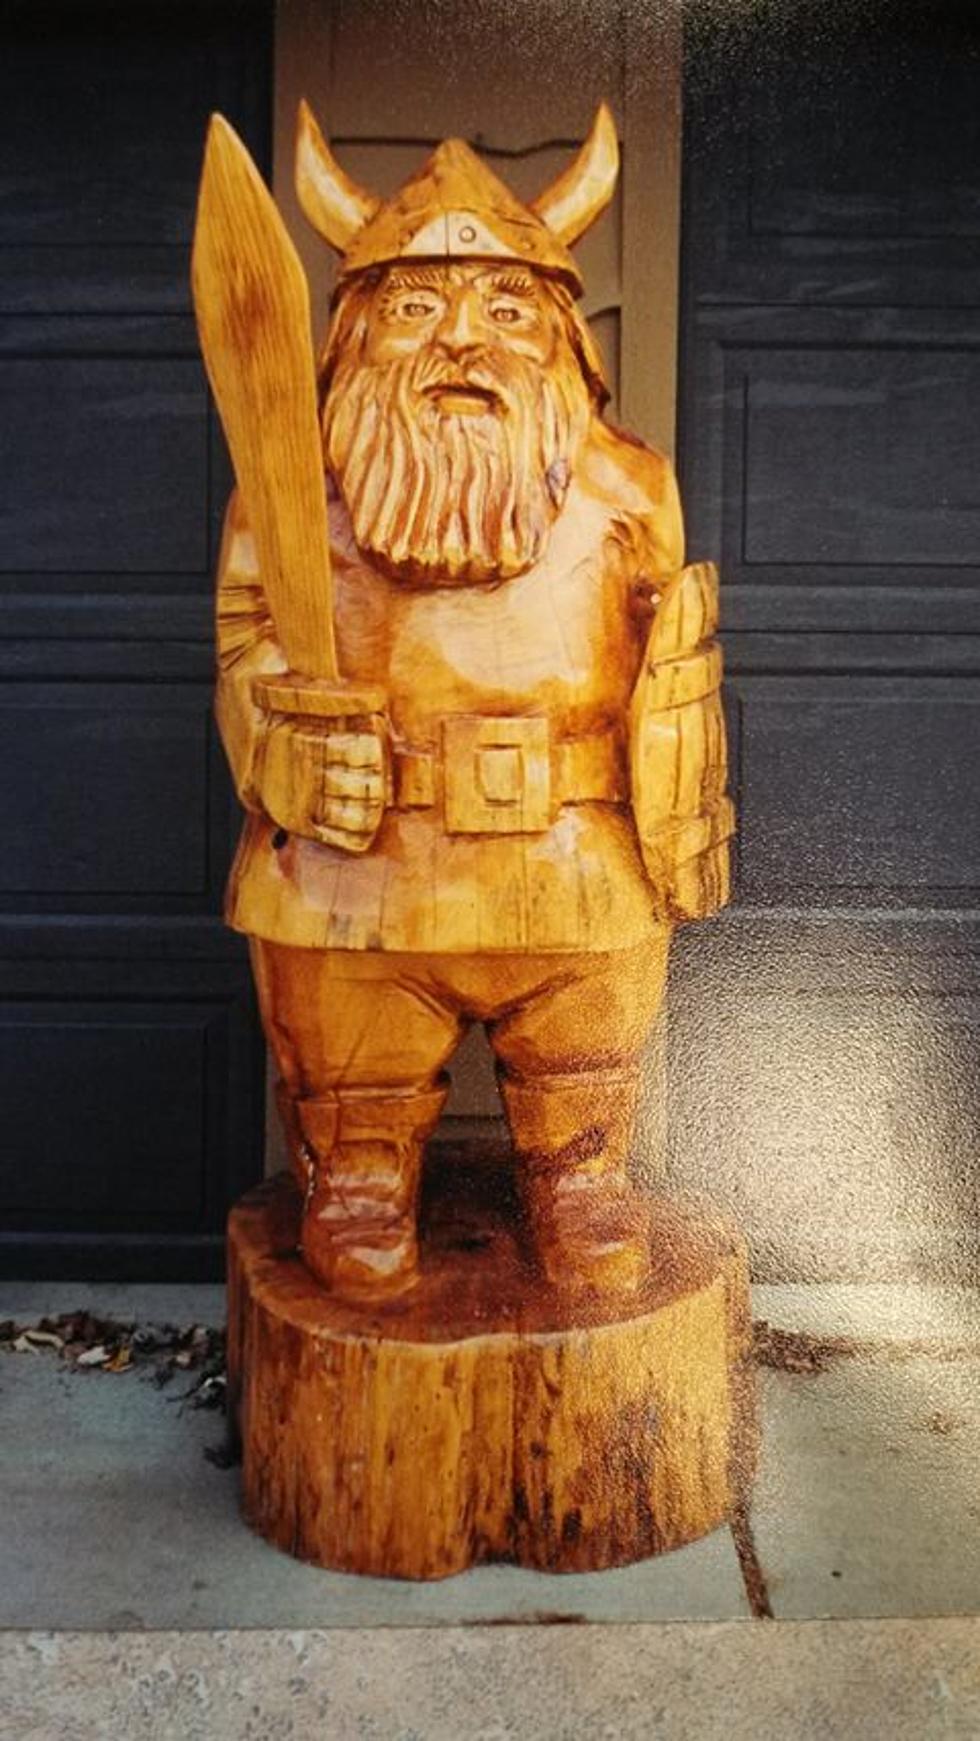 Hermantown Police Hope To Reunite Stolen Wooden Viking Statue With Its Owner